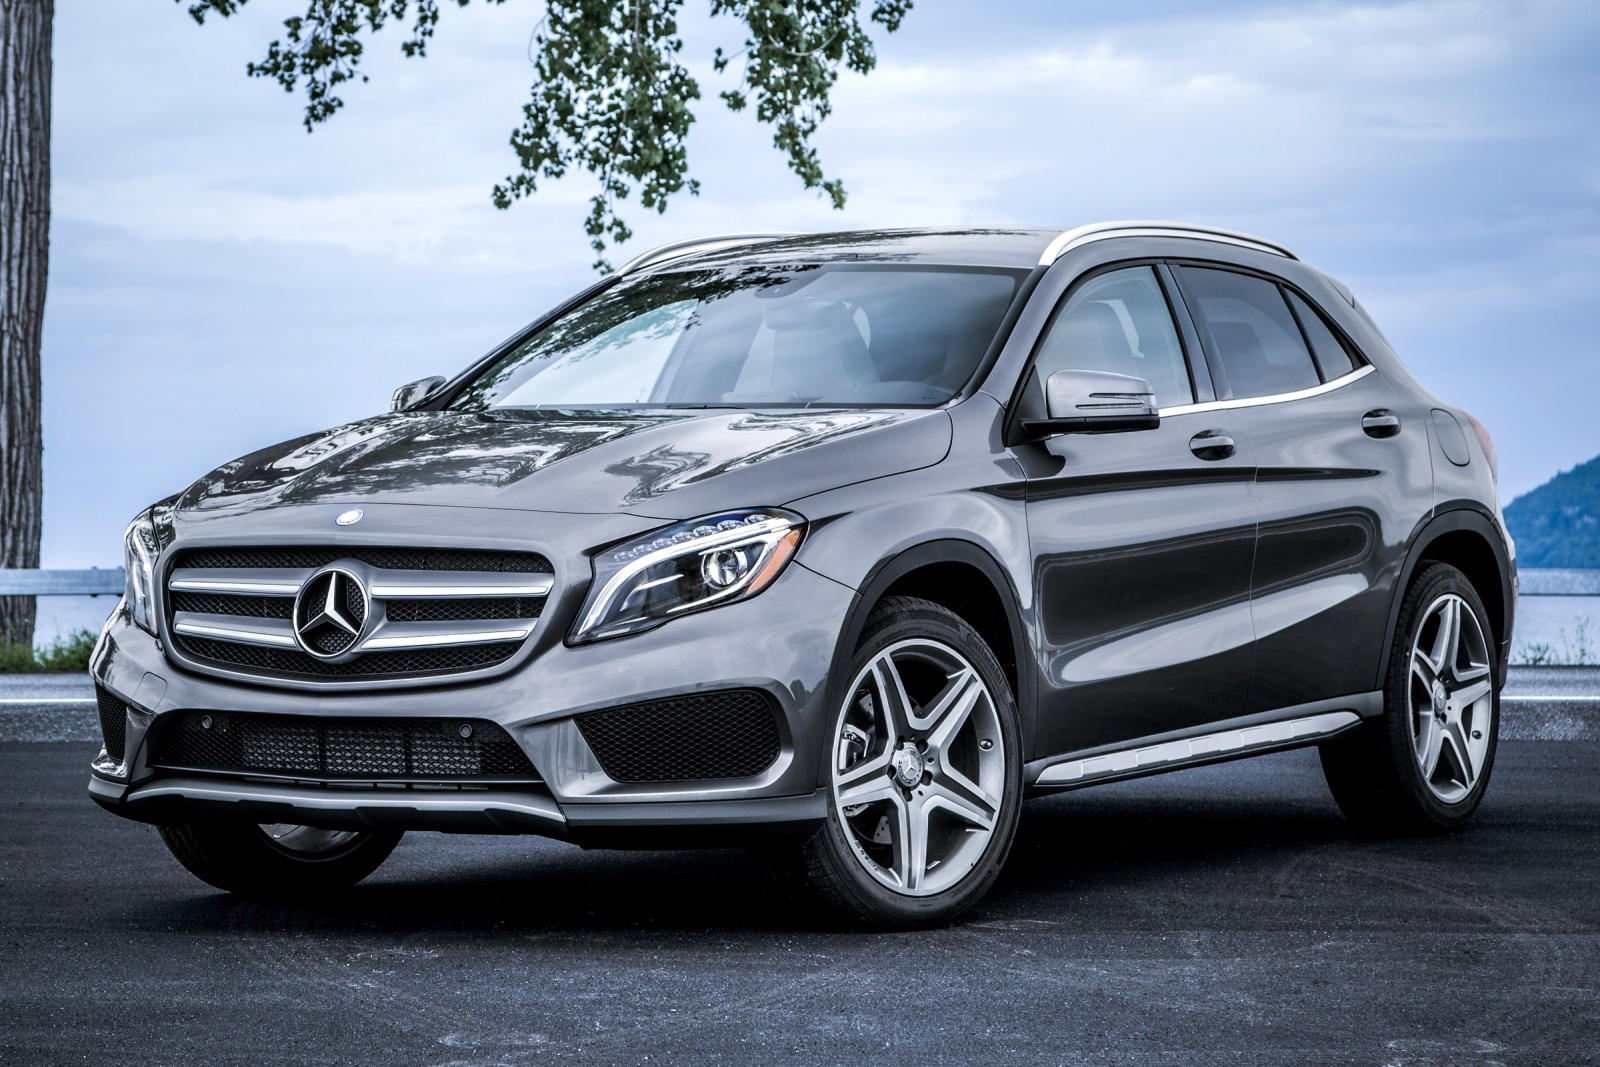 2015 Mercedes-Benz GLA-Class SUV: Review, Trims, Specs, Price, New Interior  Features, Exterior Design, and Specifications | CarBuzz